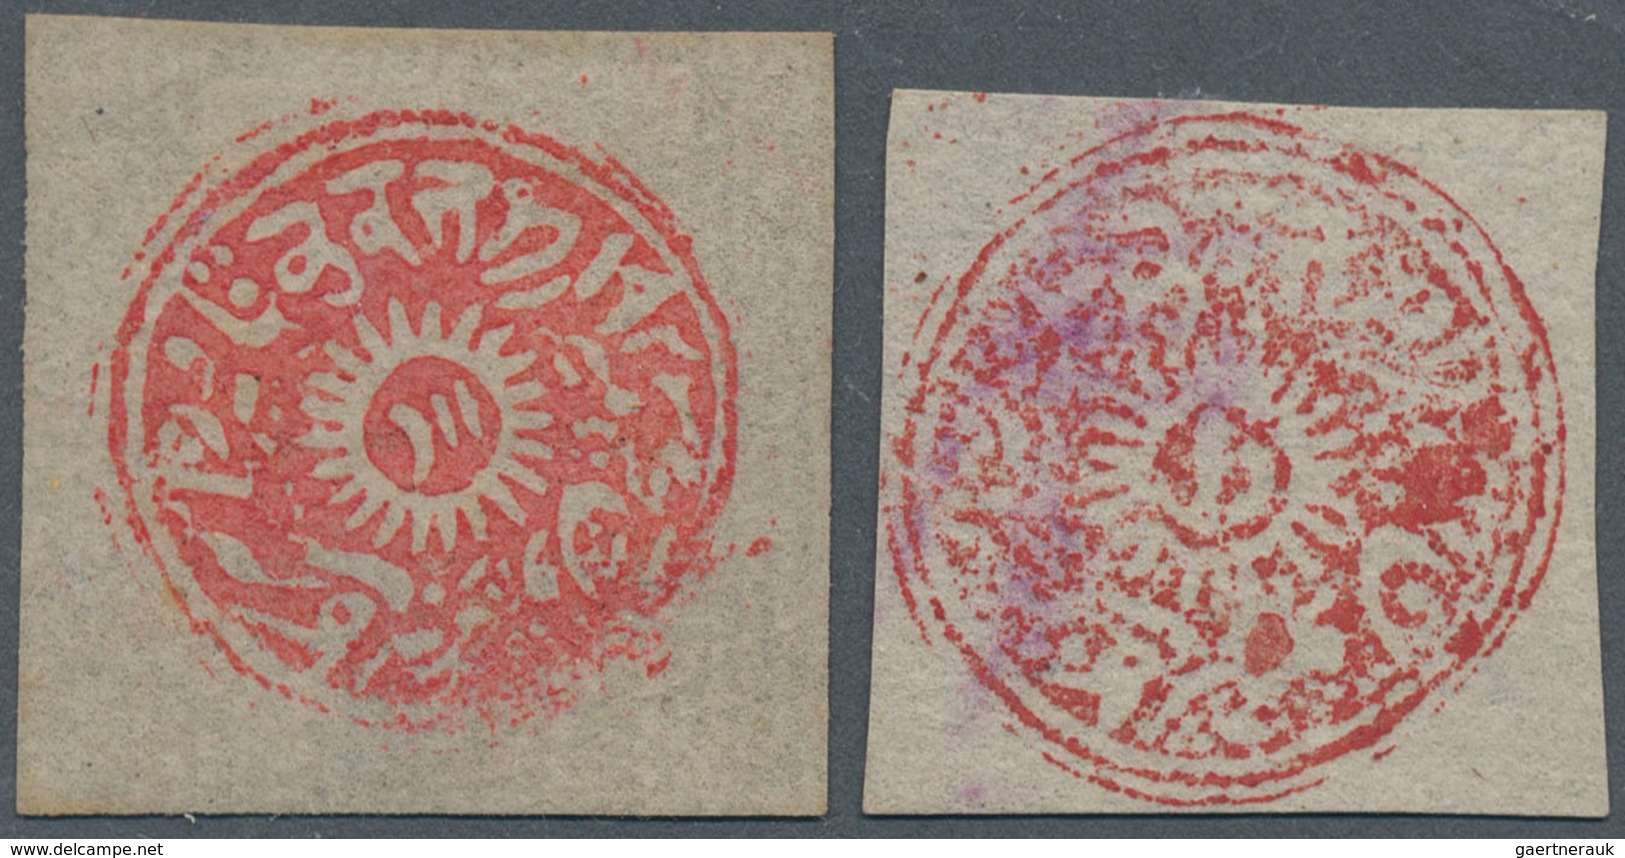 08805 Indien - Feudalstaaten: JAMMU & KASHMIR 1877-78 Circulars ½a. Red And 1a. Deep Red Both Handstamped - Autres & Non Classés